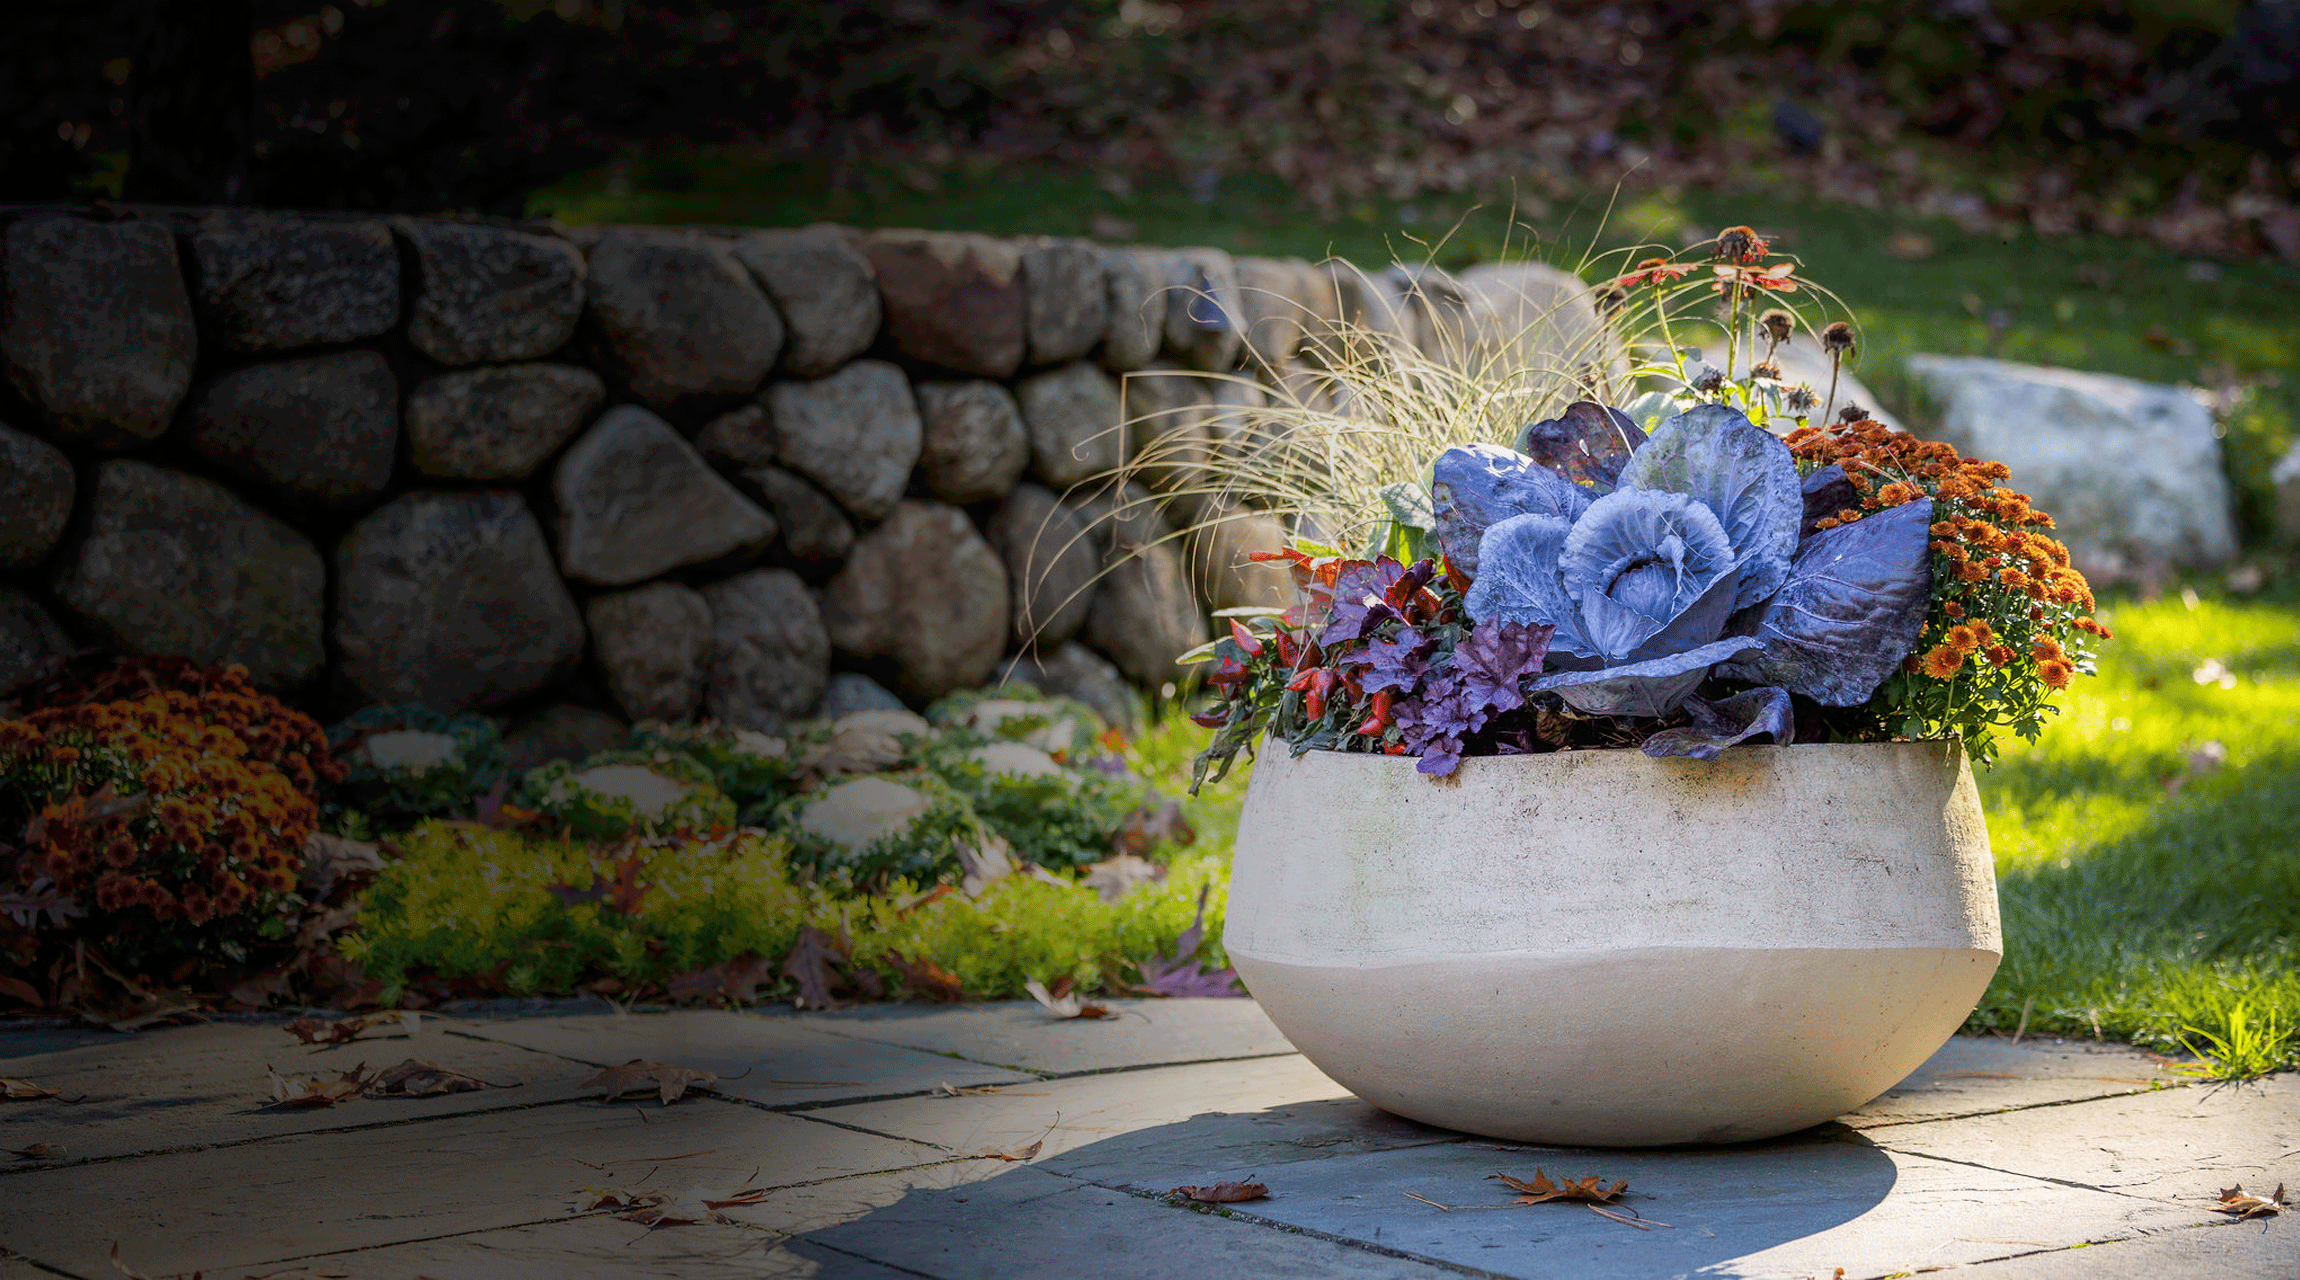 A large decorative planter with various plants sits on a paved surface near a stone retaining wall with fallen autumn leaves scattered around.